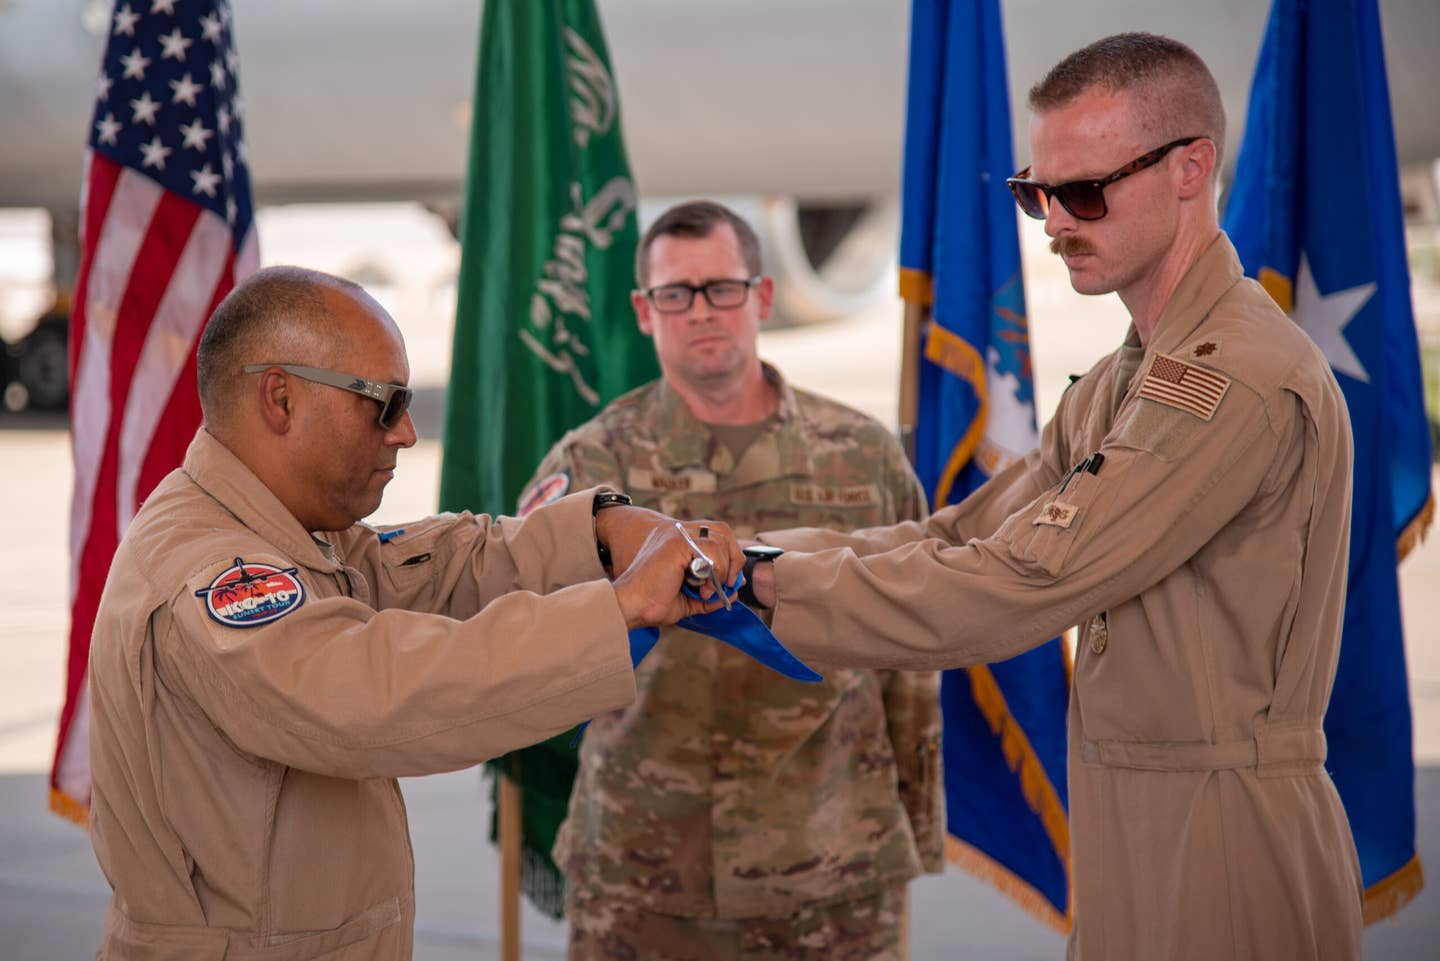 U.S. Air Force Maj. Joseph Rush (right), 908th Expeditionary Air Refueling Squadron (EARS) commander, and Brig. Gen. Akshai Gandhi (left), 378th Air Expeditionary Wing commander, roll up the 908th EARS <a href="https://dodguidons.com/categories/air-force-guidon.html">guidon</a> during an inactivation ceremony at Prince Sultan Air Base, Oct. 4, 2023. <em>U.S. Air Force photo by Tech. Sgt. Alexander Frank</em>